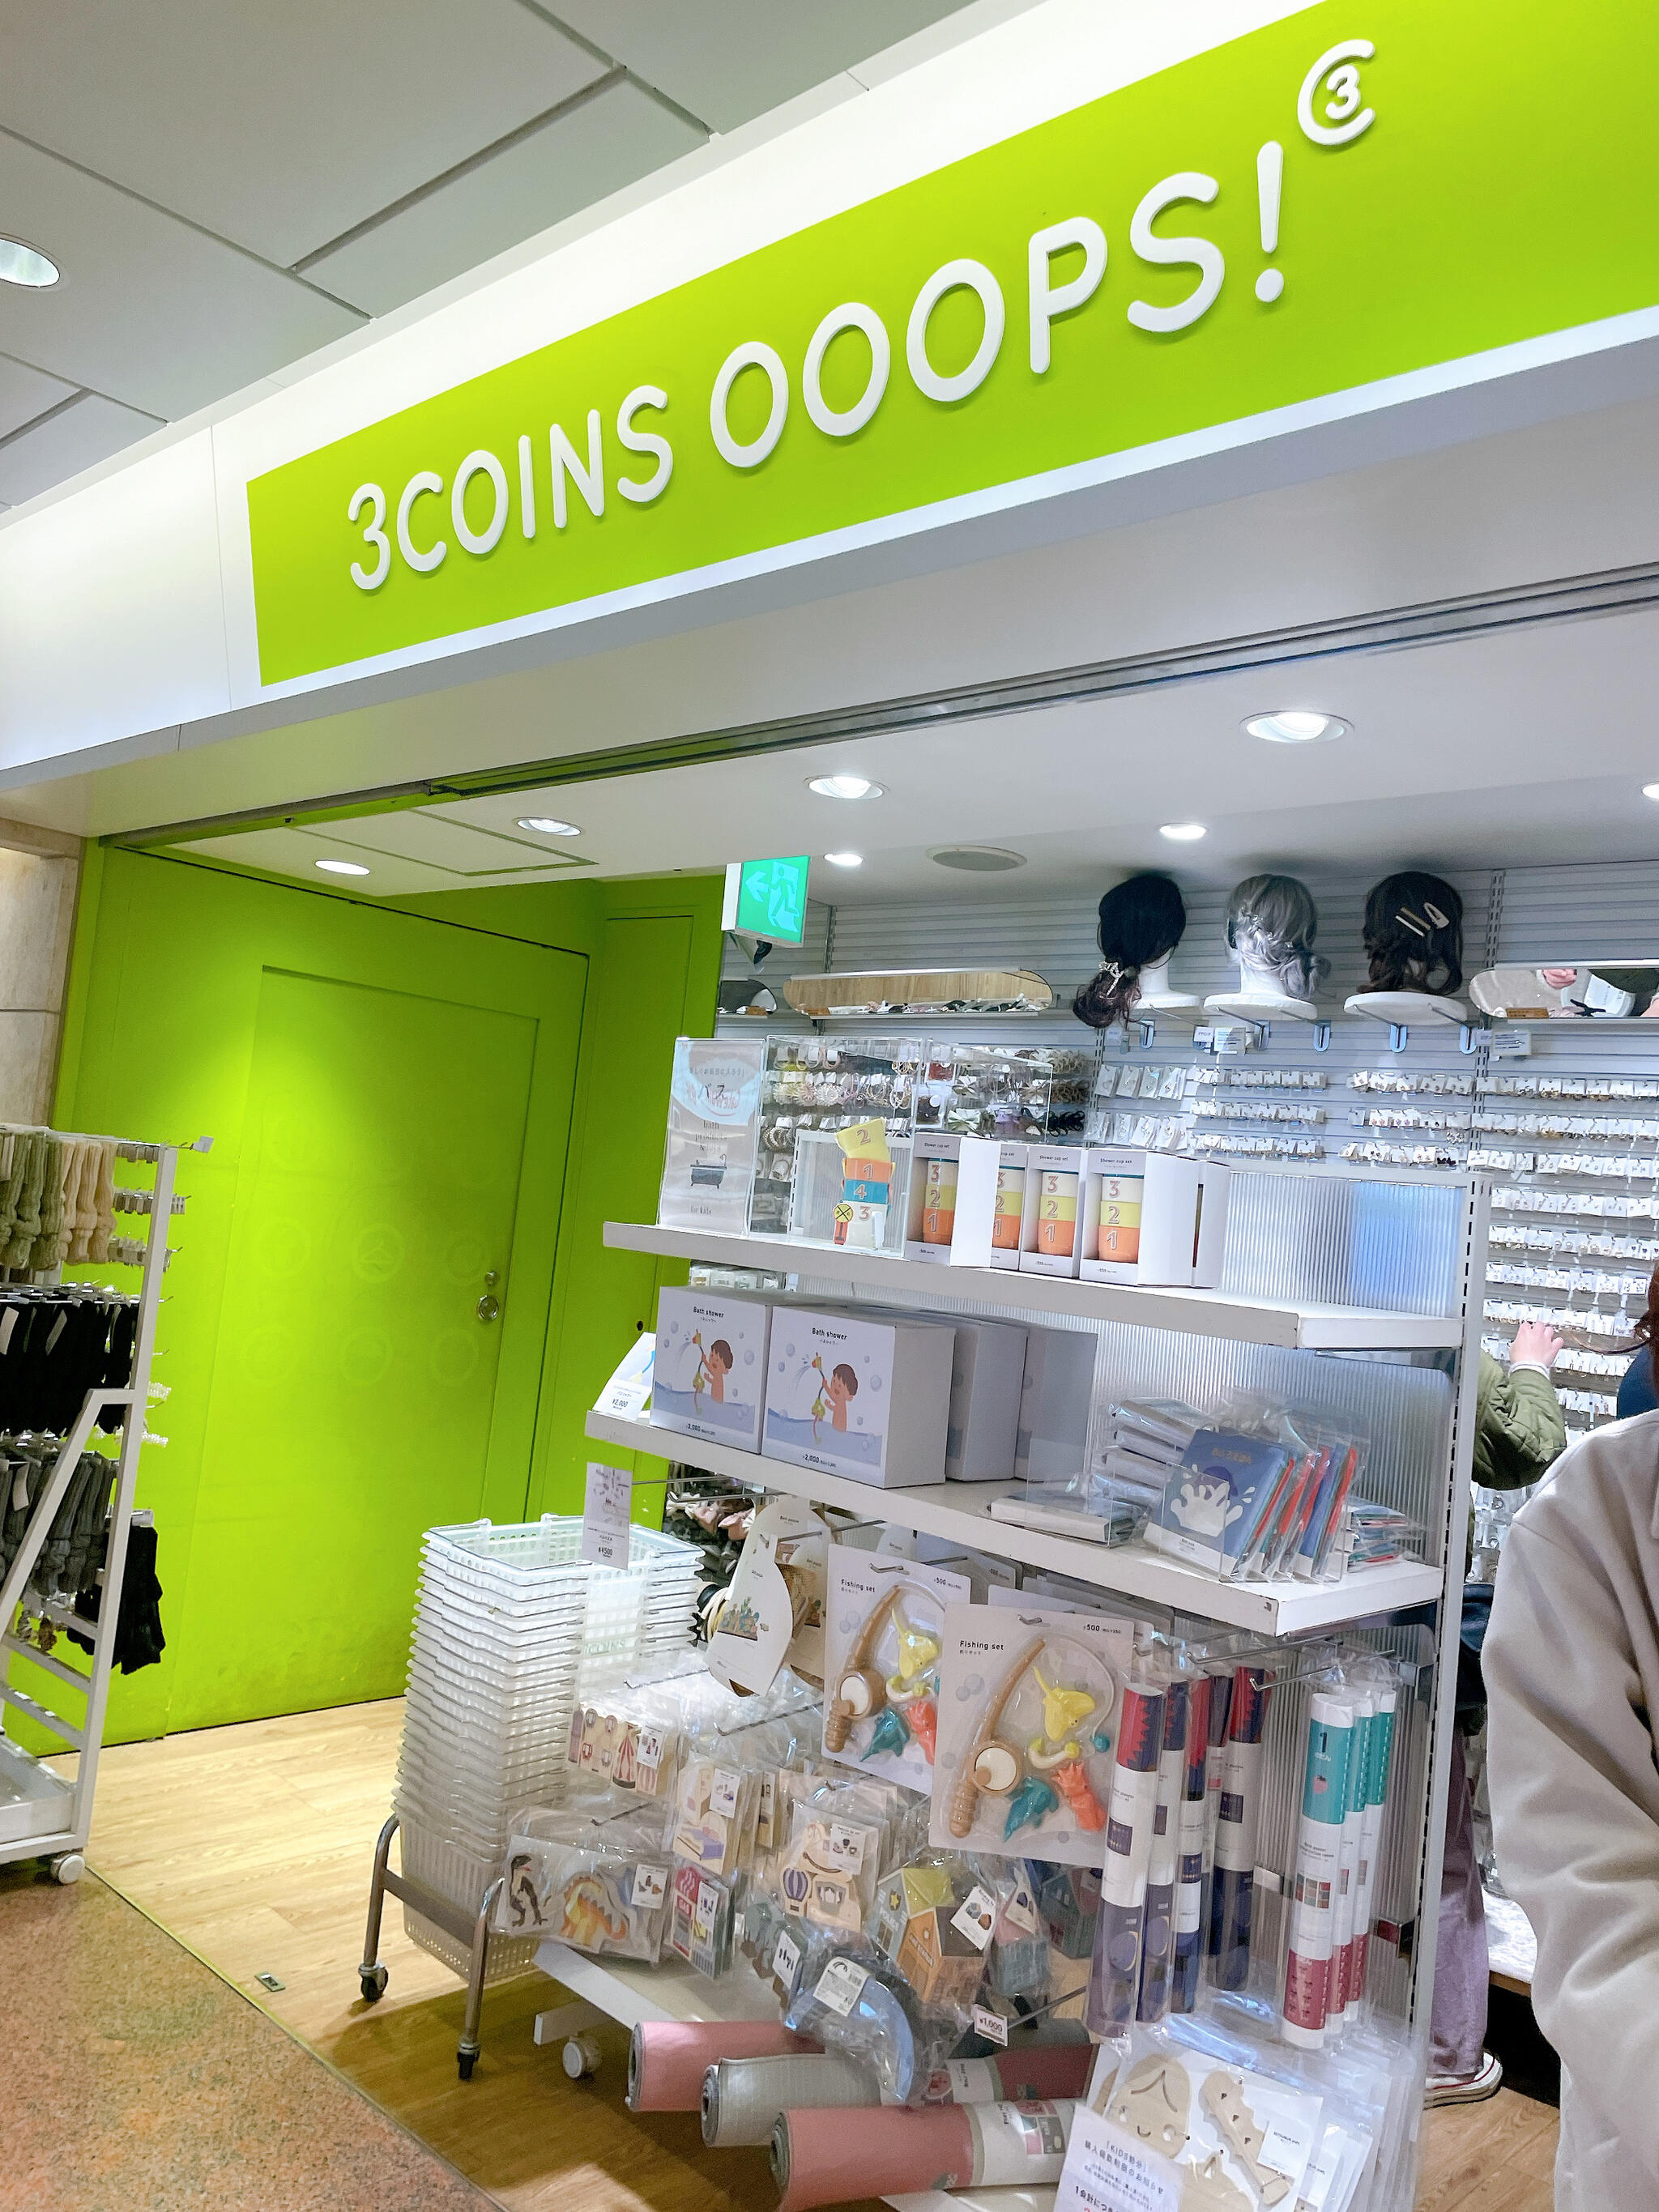 3COINS OOOPS! ゲートウォーク名古屋店の代表写真9